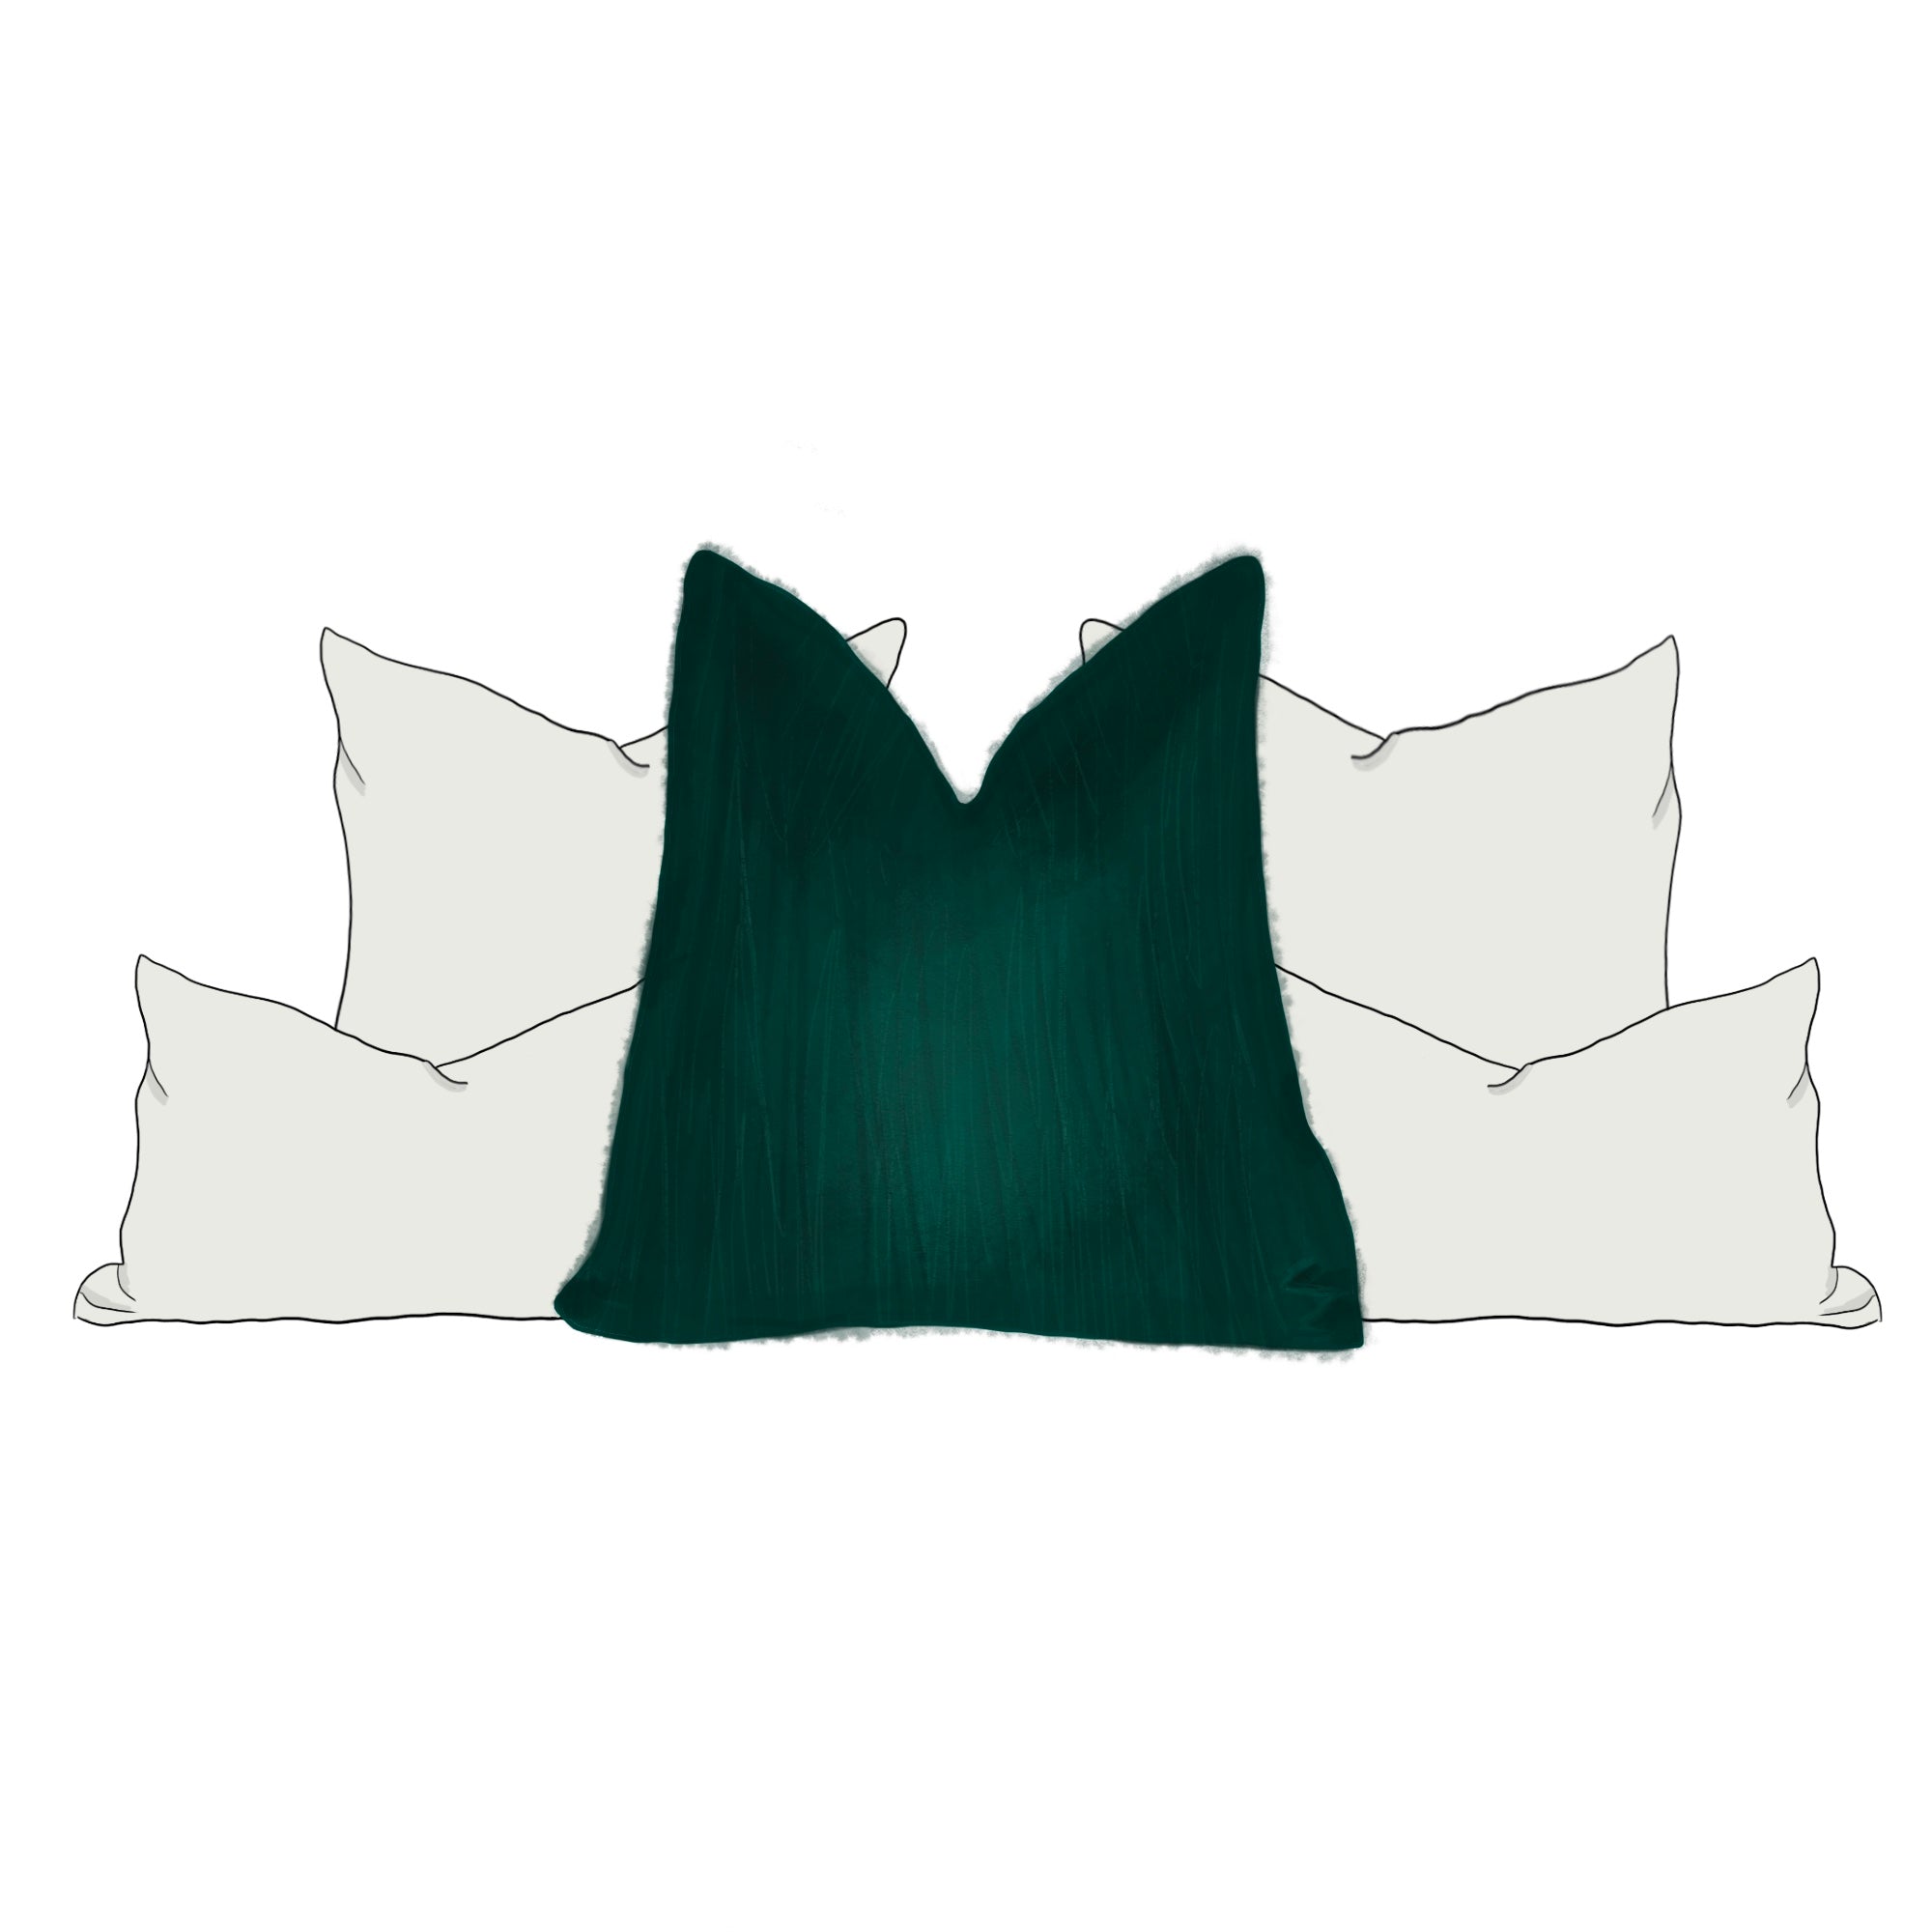 Pair -20 Pillow Inserts for 18x18 Pillow Covers